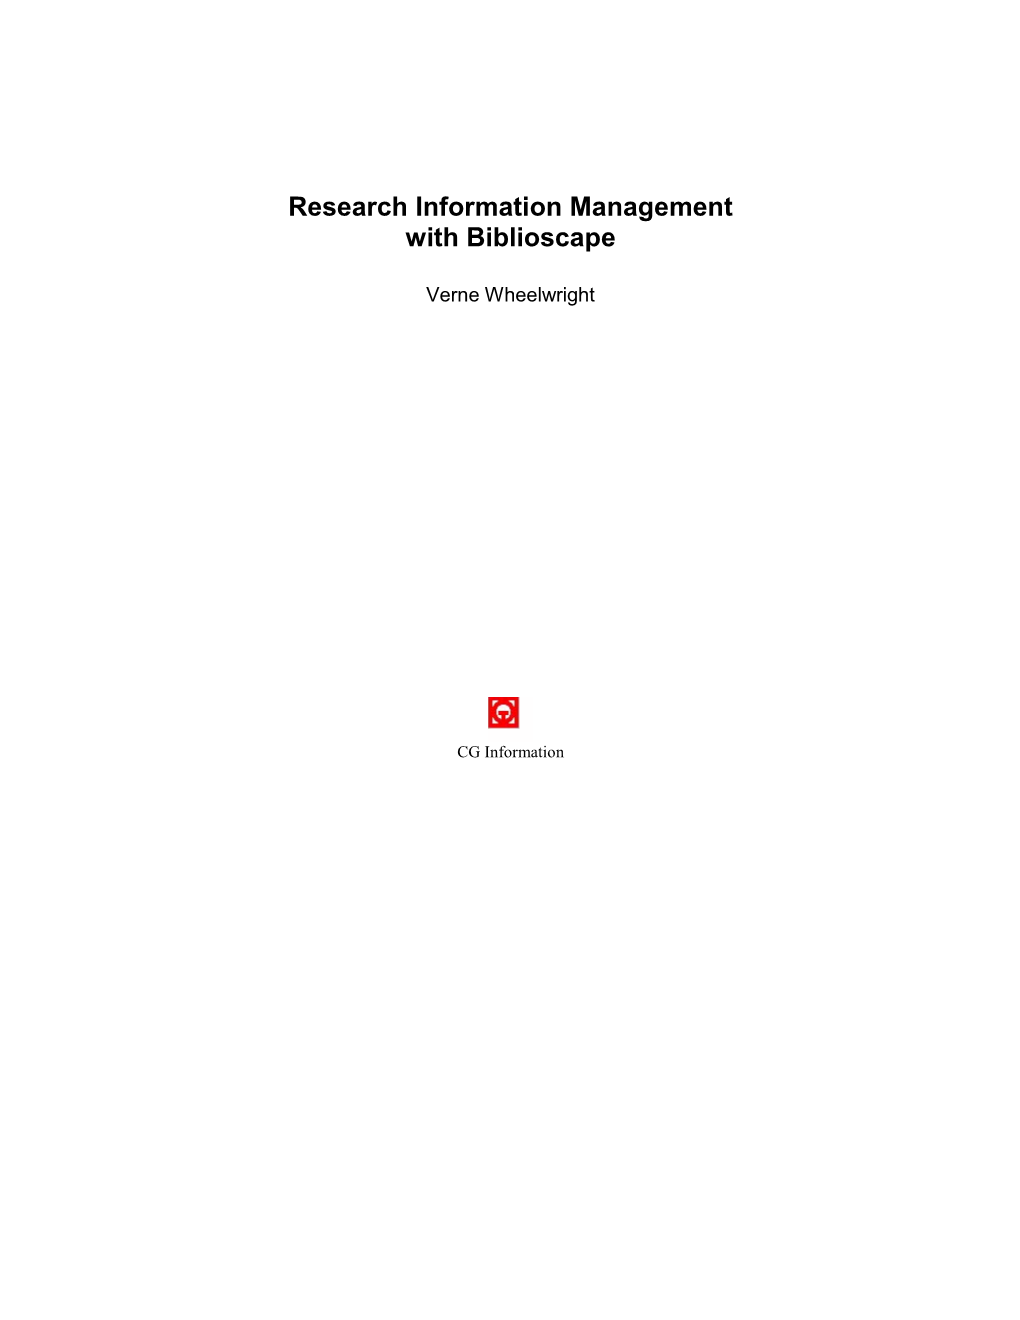 Research Information Management with Biblioscape